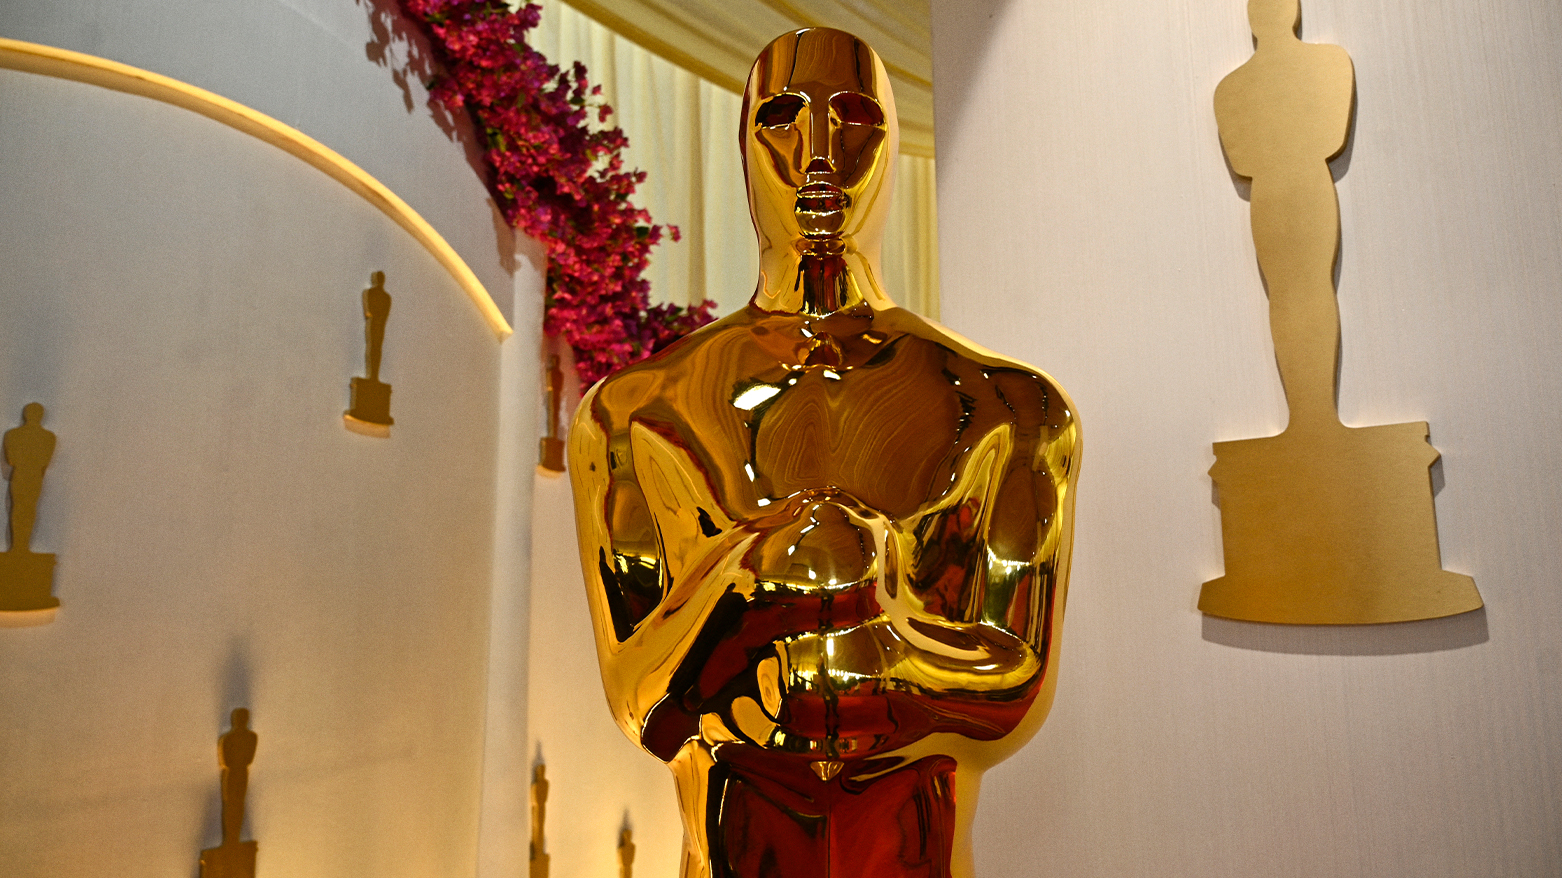 An Oscar statue is pictured at the red carpet of the 96th Annual Academy Awards at the Dolby Theatre in Hollywood, California on March 9, 2024. The 96th Annual Academy Awards will be held on March 10. (Photo: PEDRO UGARTE / AFP)